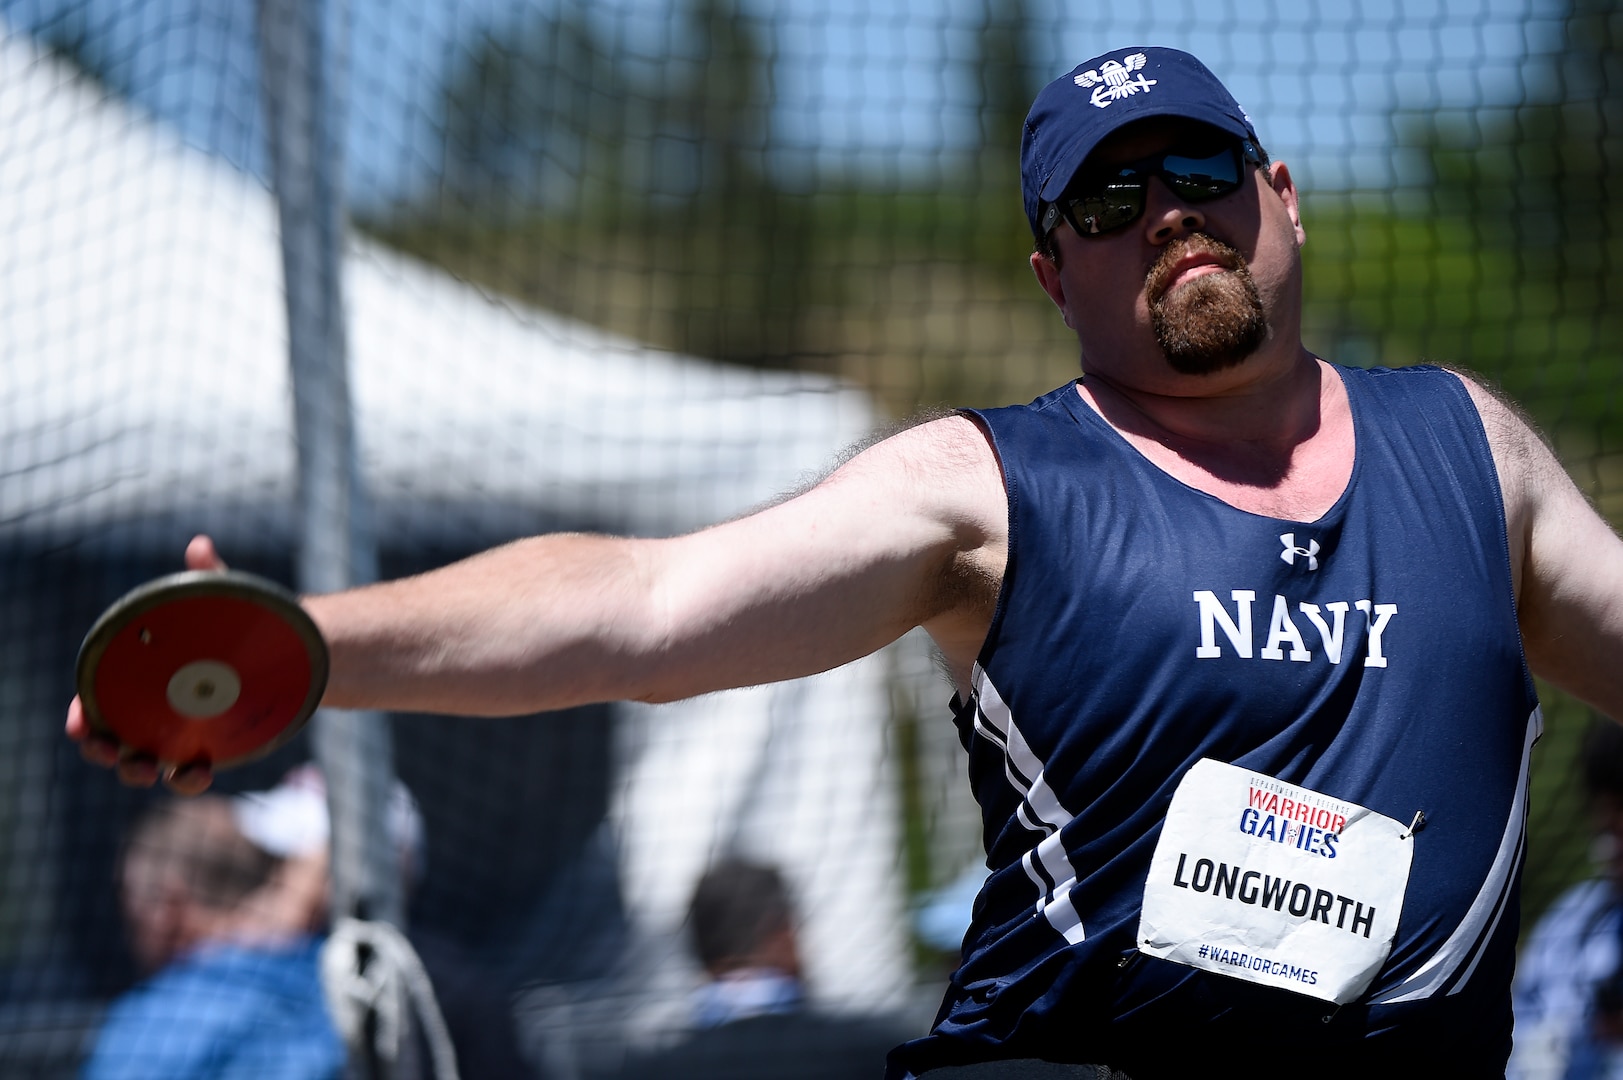 Bill Longworth competes in seated discuss during the 2018 Warrior Games. (Courtesy photo)